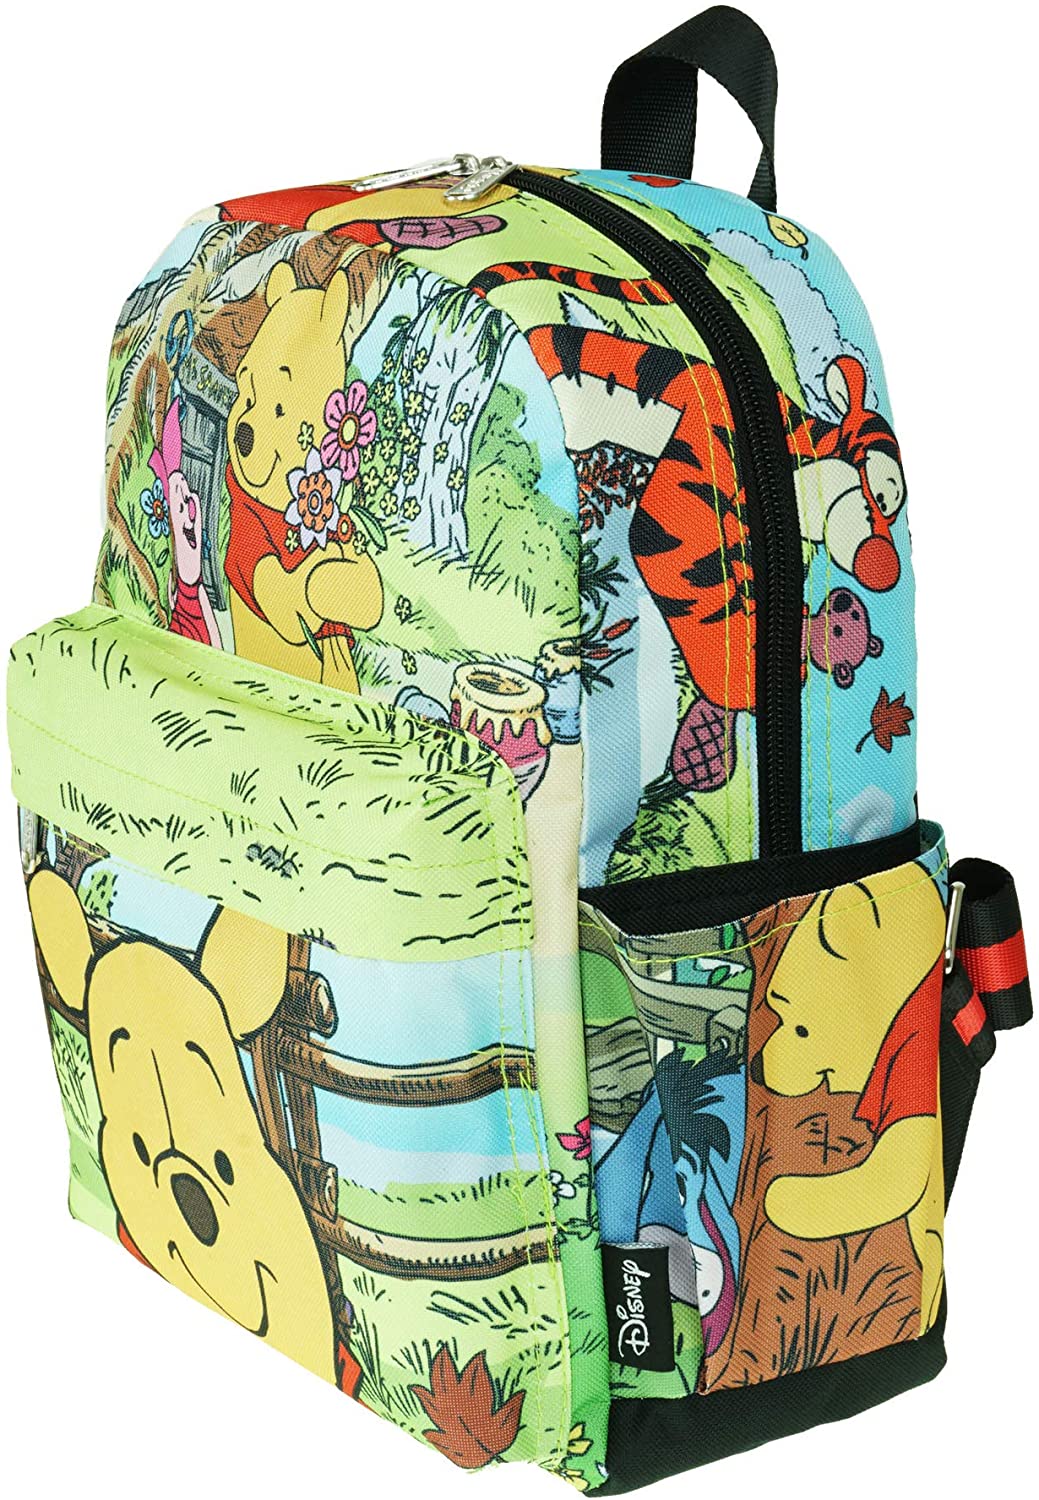 Winnie the Pooh 12" Deluxe Oversize Print Daypack - A21324 - GTE Zone